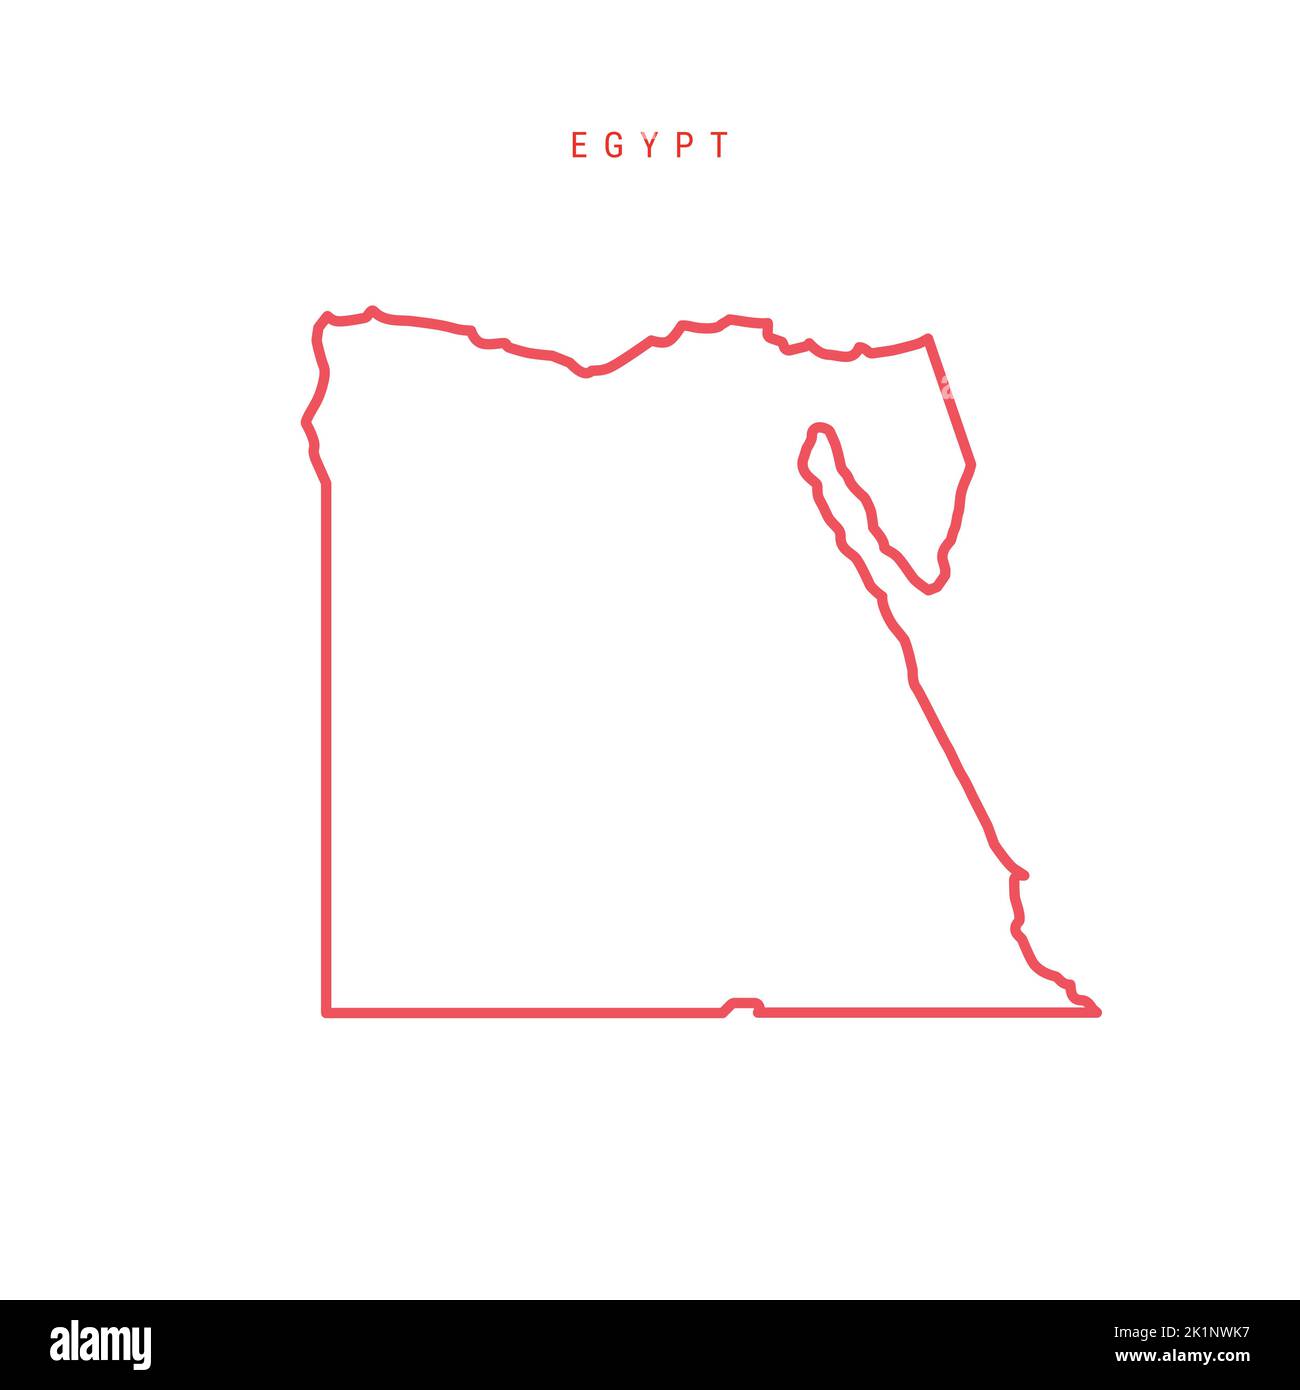 Egypt editable outline map. Egyptian red border. Country name. Adjust line weight. Change to any color. Vector illustration. Stock Vector